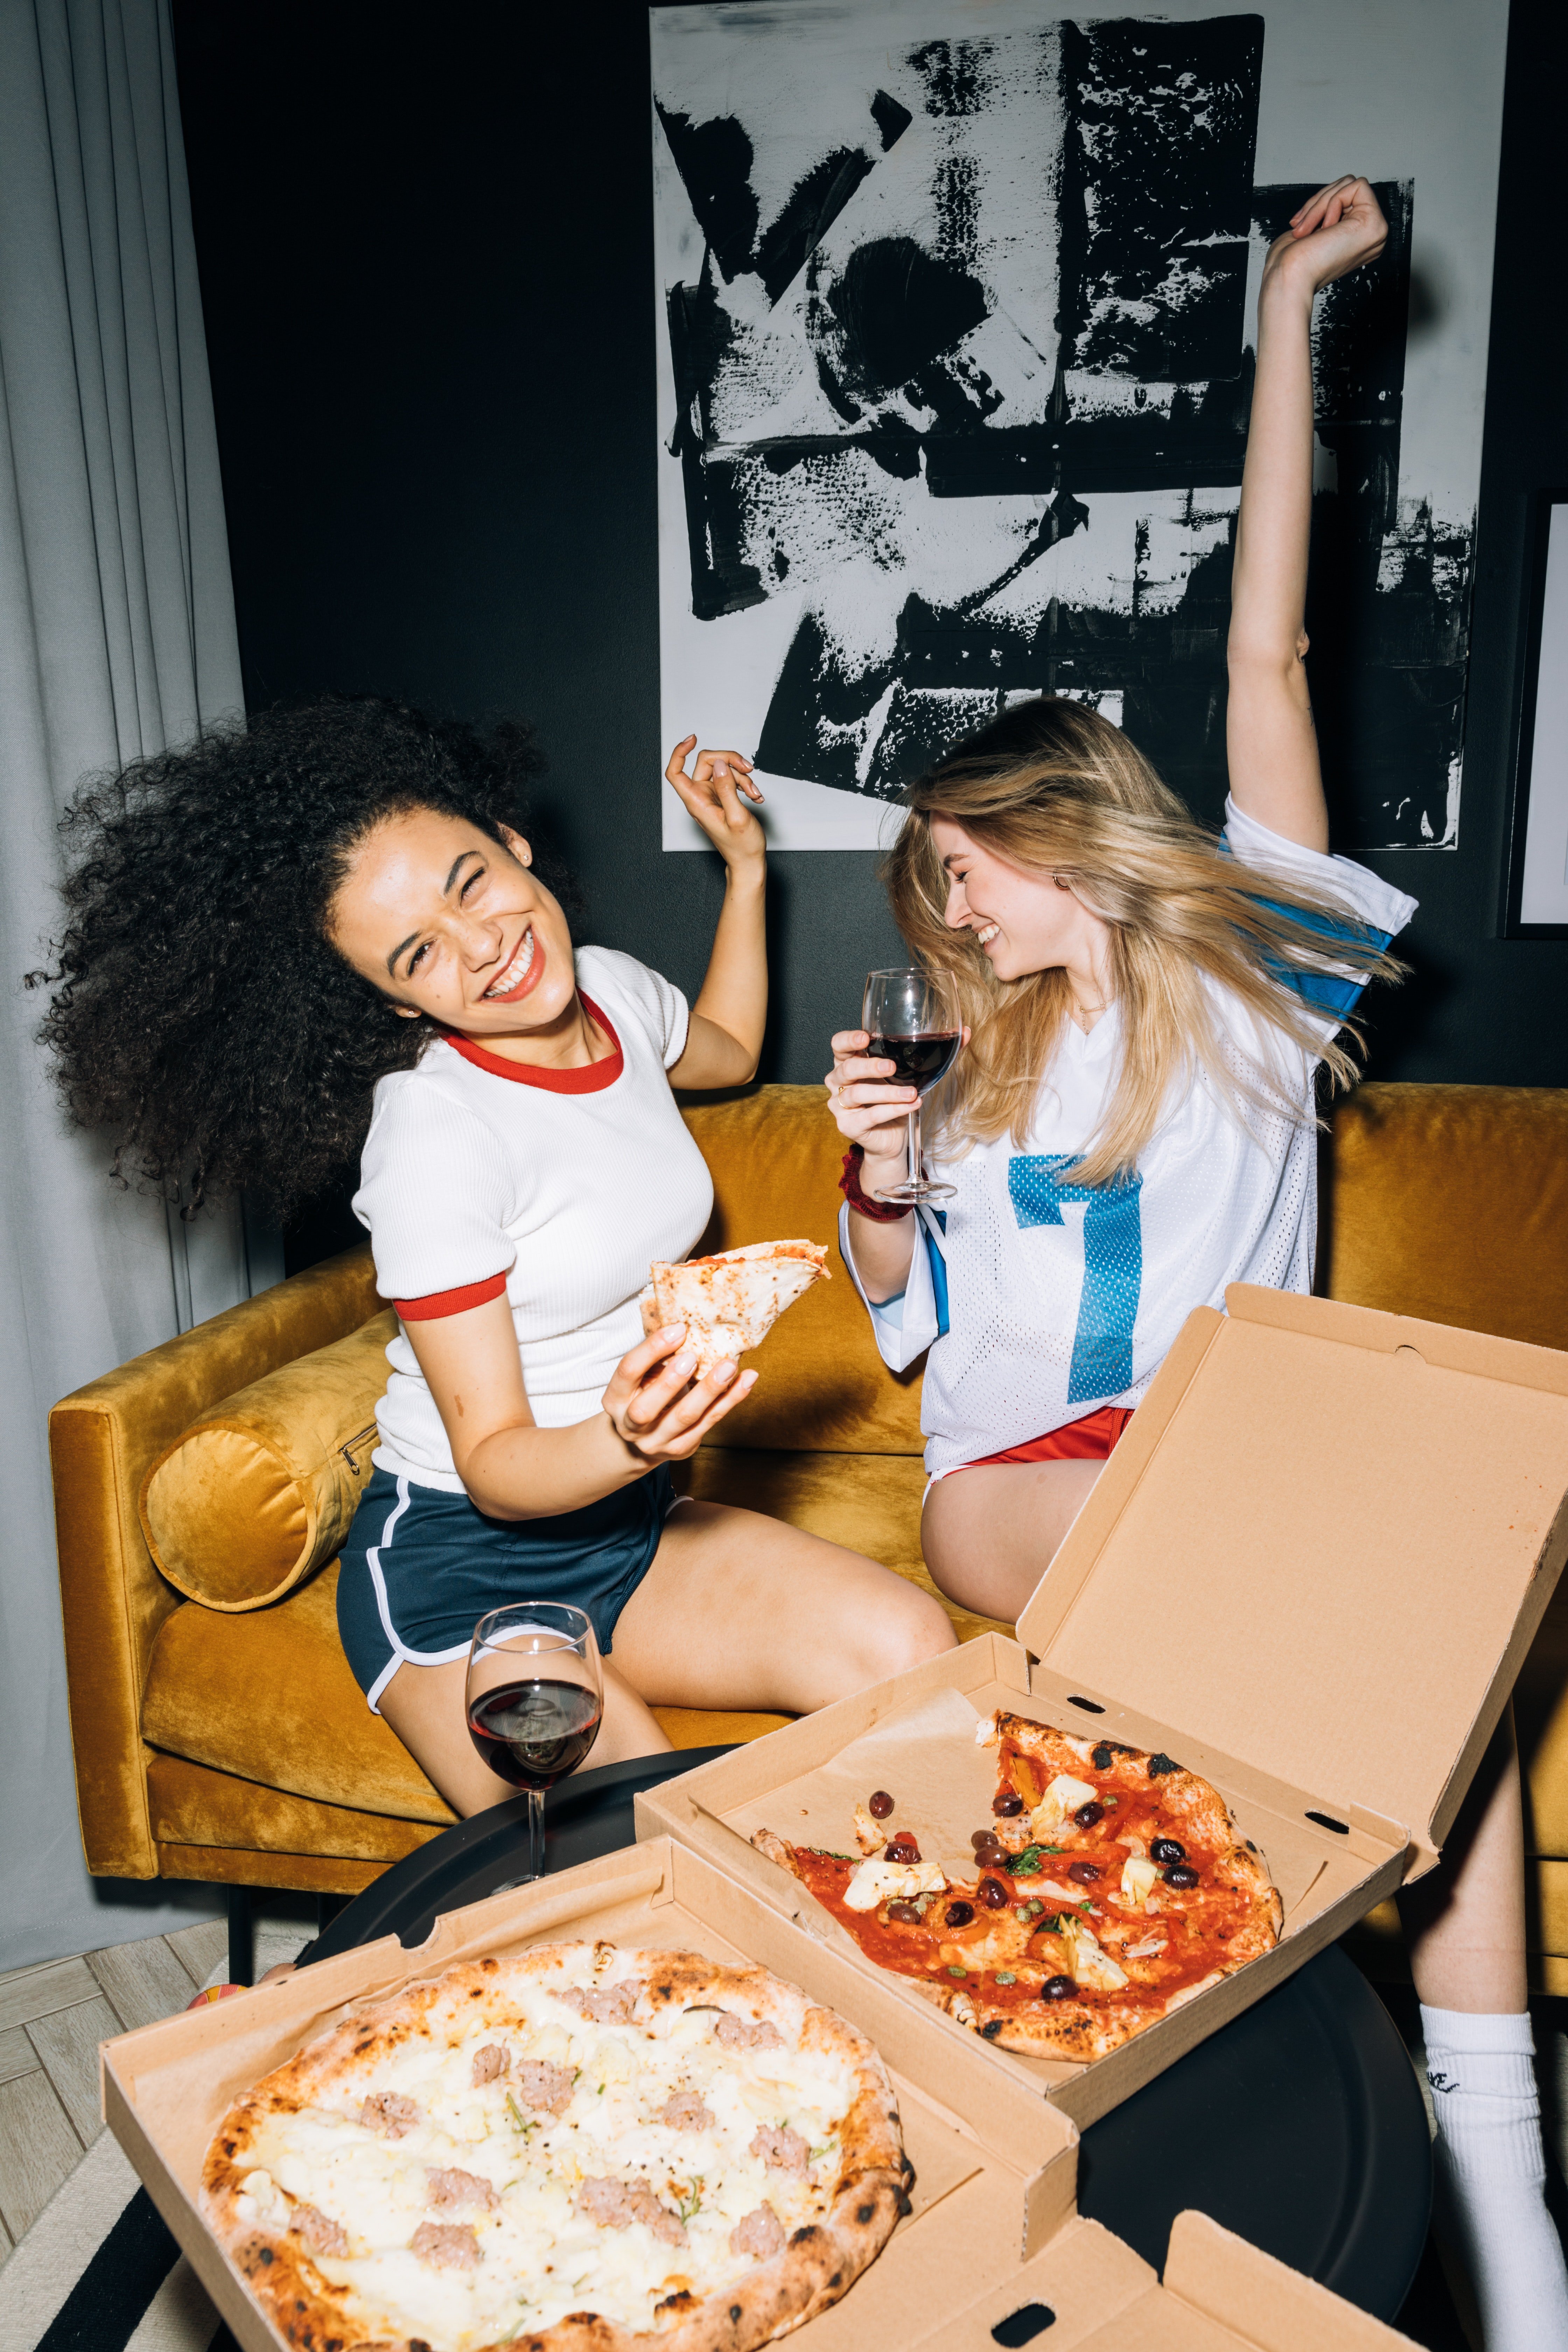 Pictured - Two young women having fun | Source: Pexels 